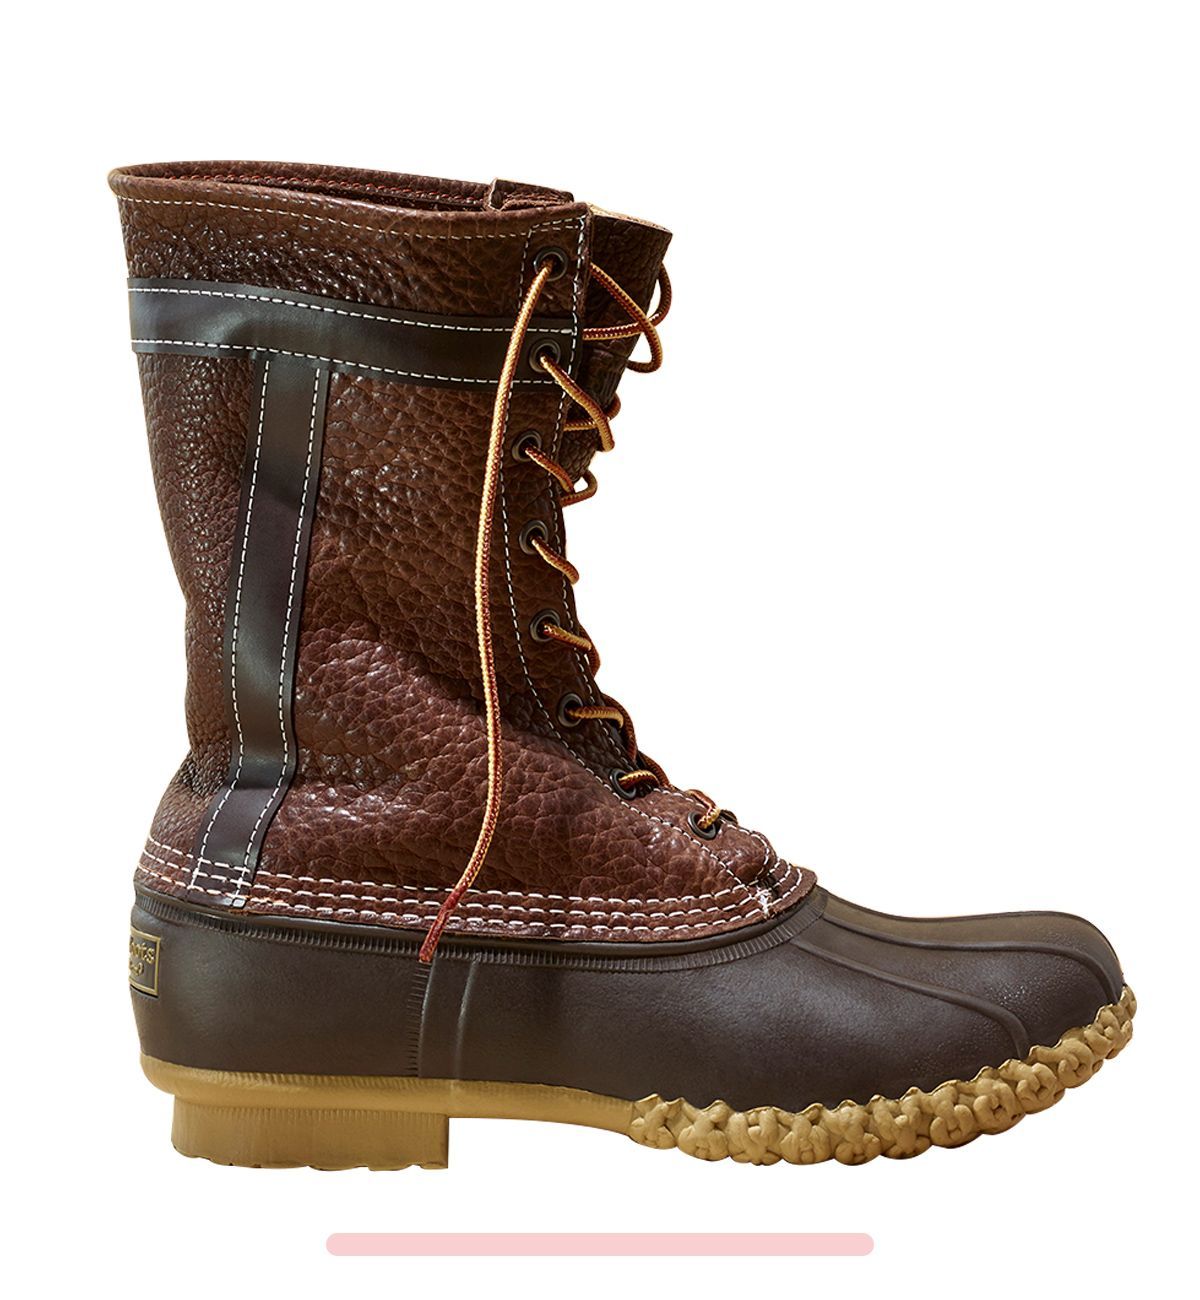 Bean Boot in Chocolate Bison Leather